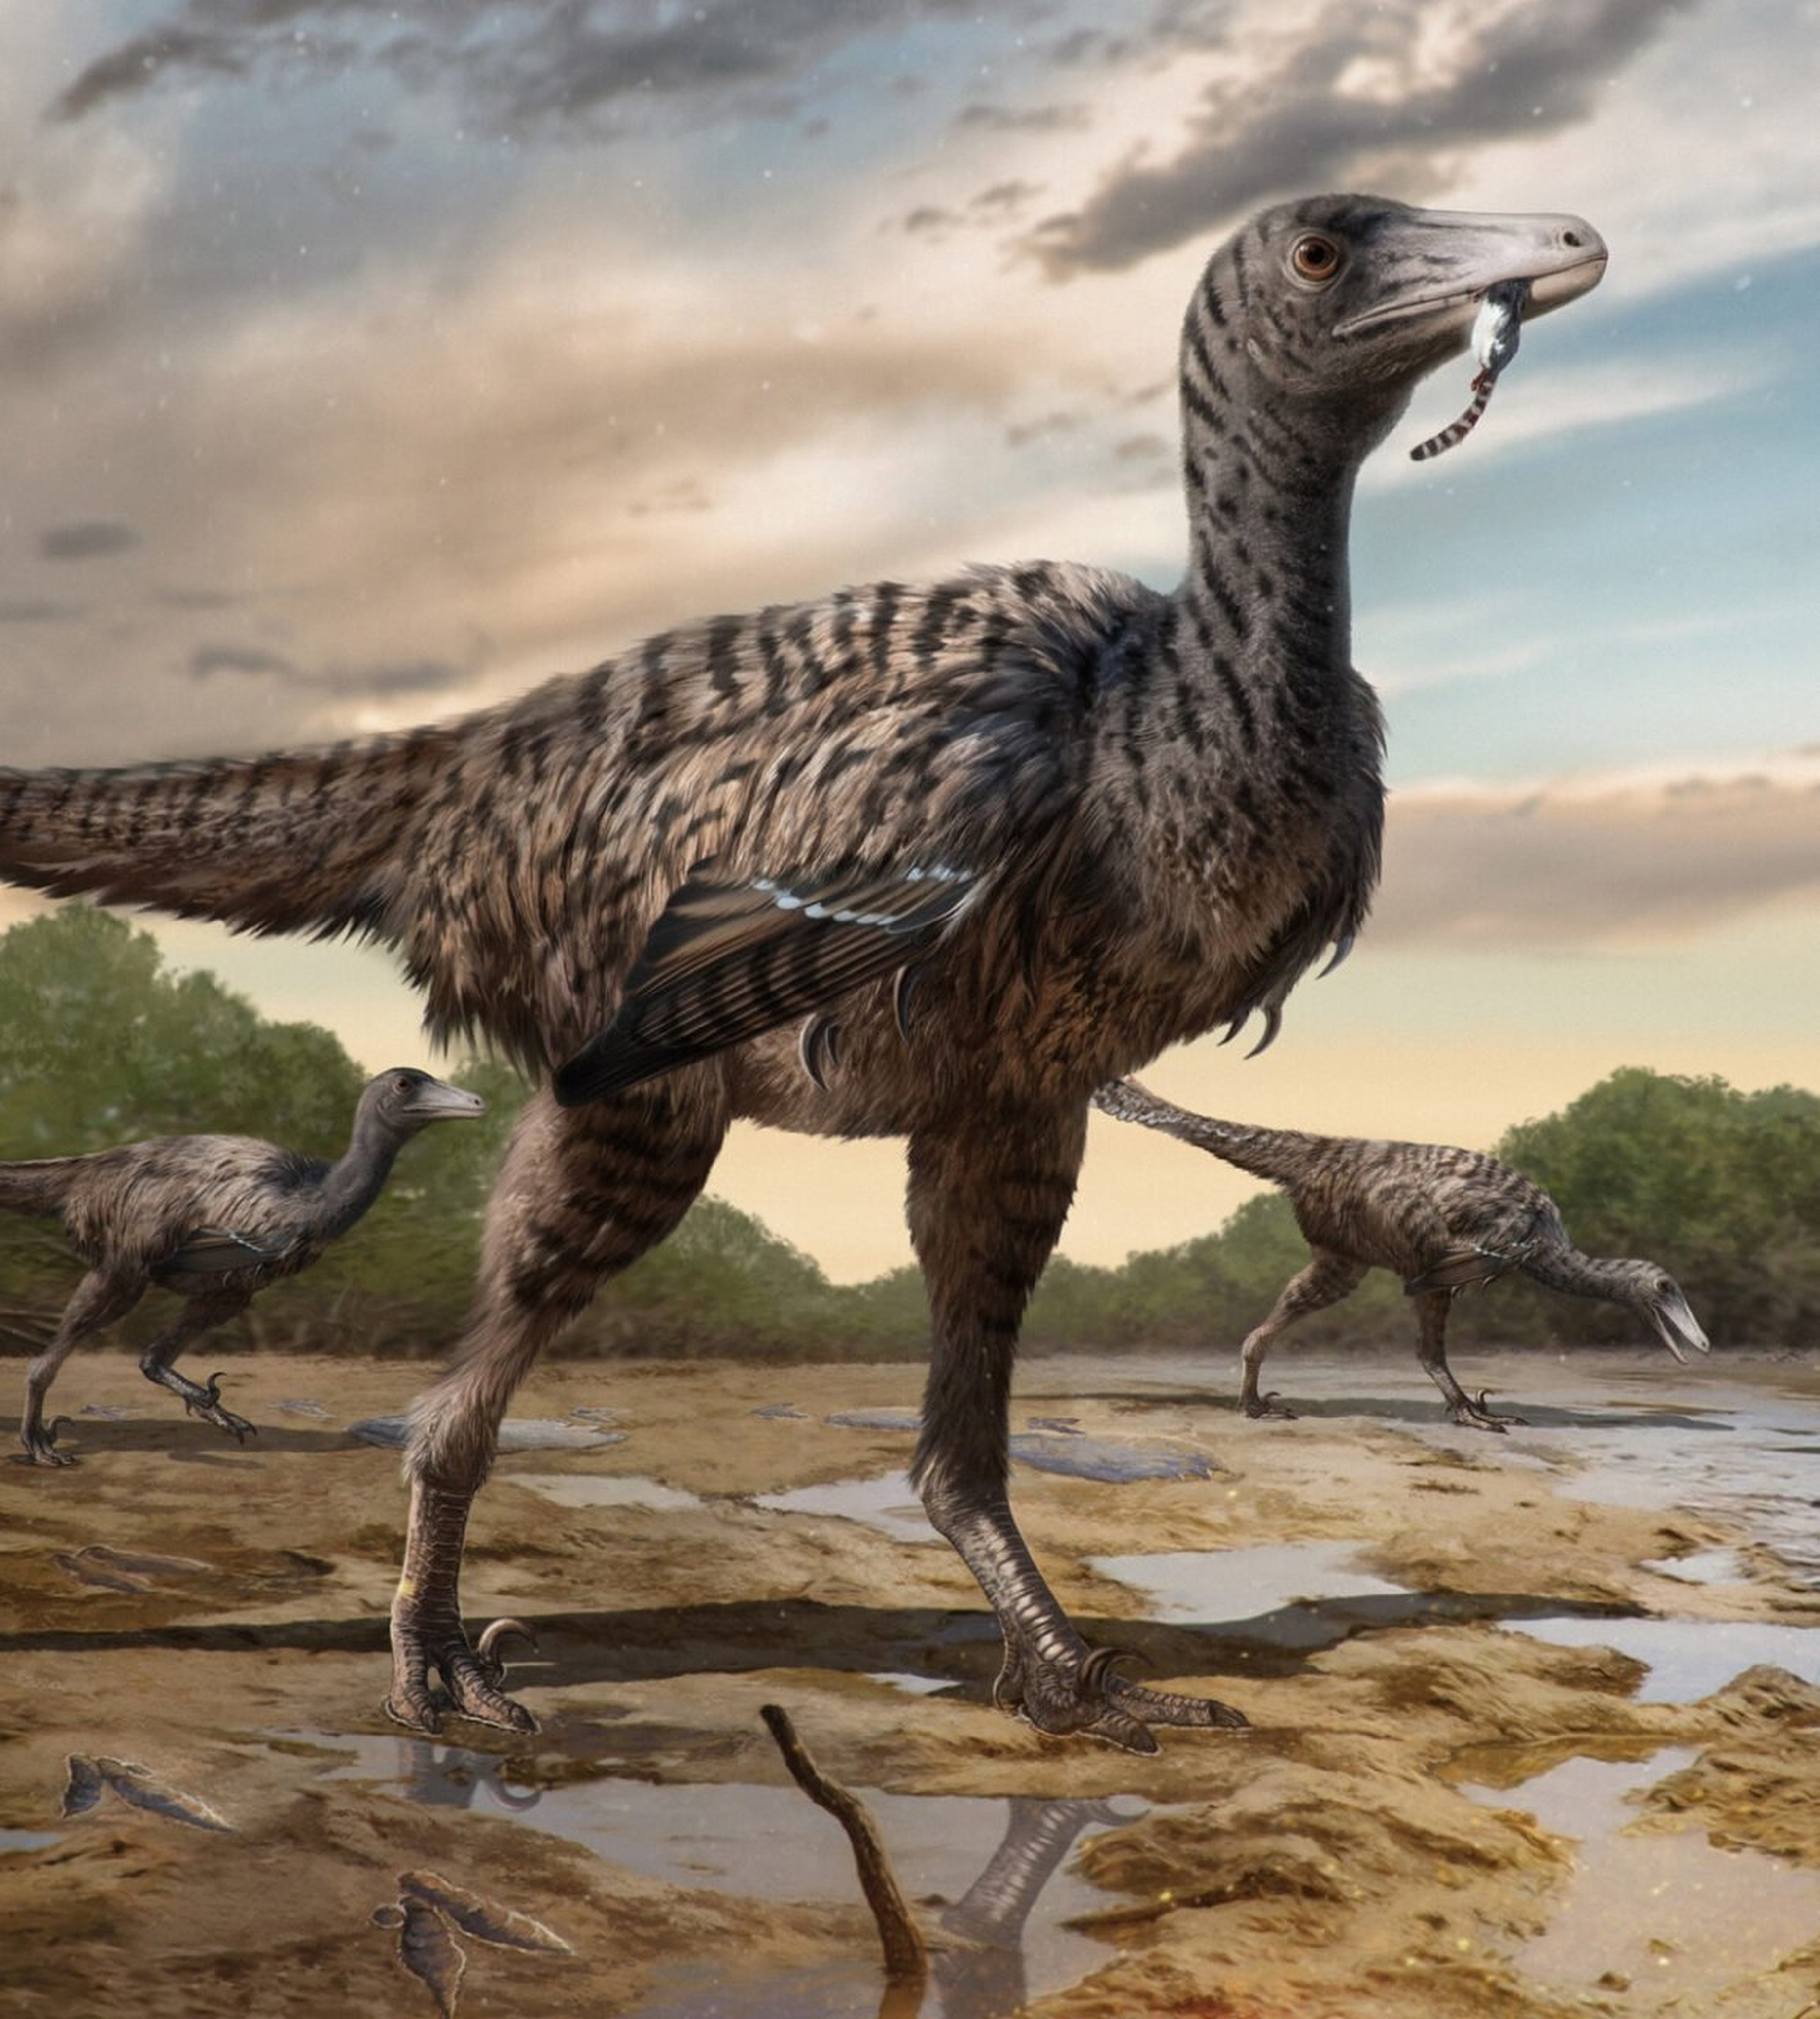 Giant raptors such as the Fujianipus yingliangi might have surpassed similar dinosaurs in size, according to researchers. Photo: iScience